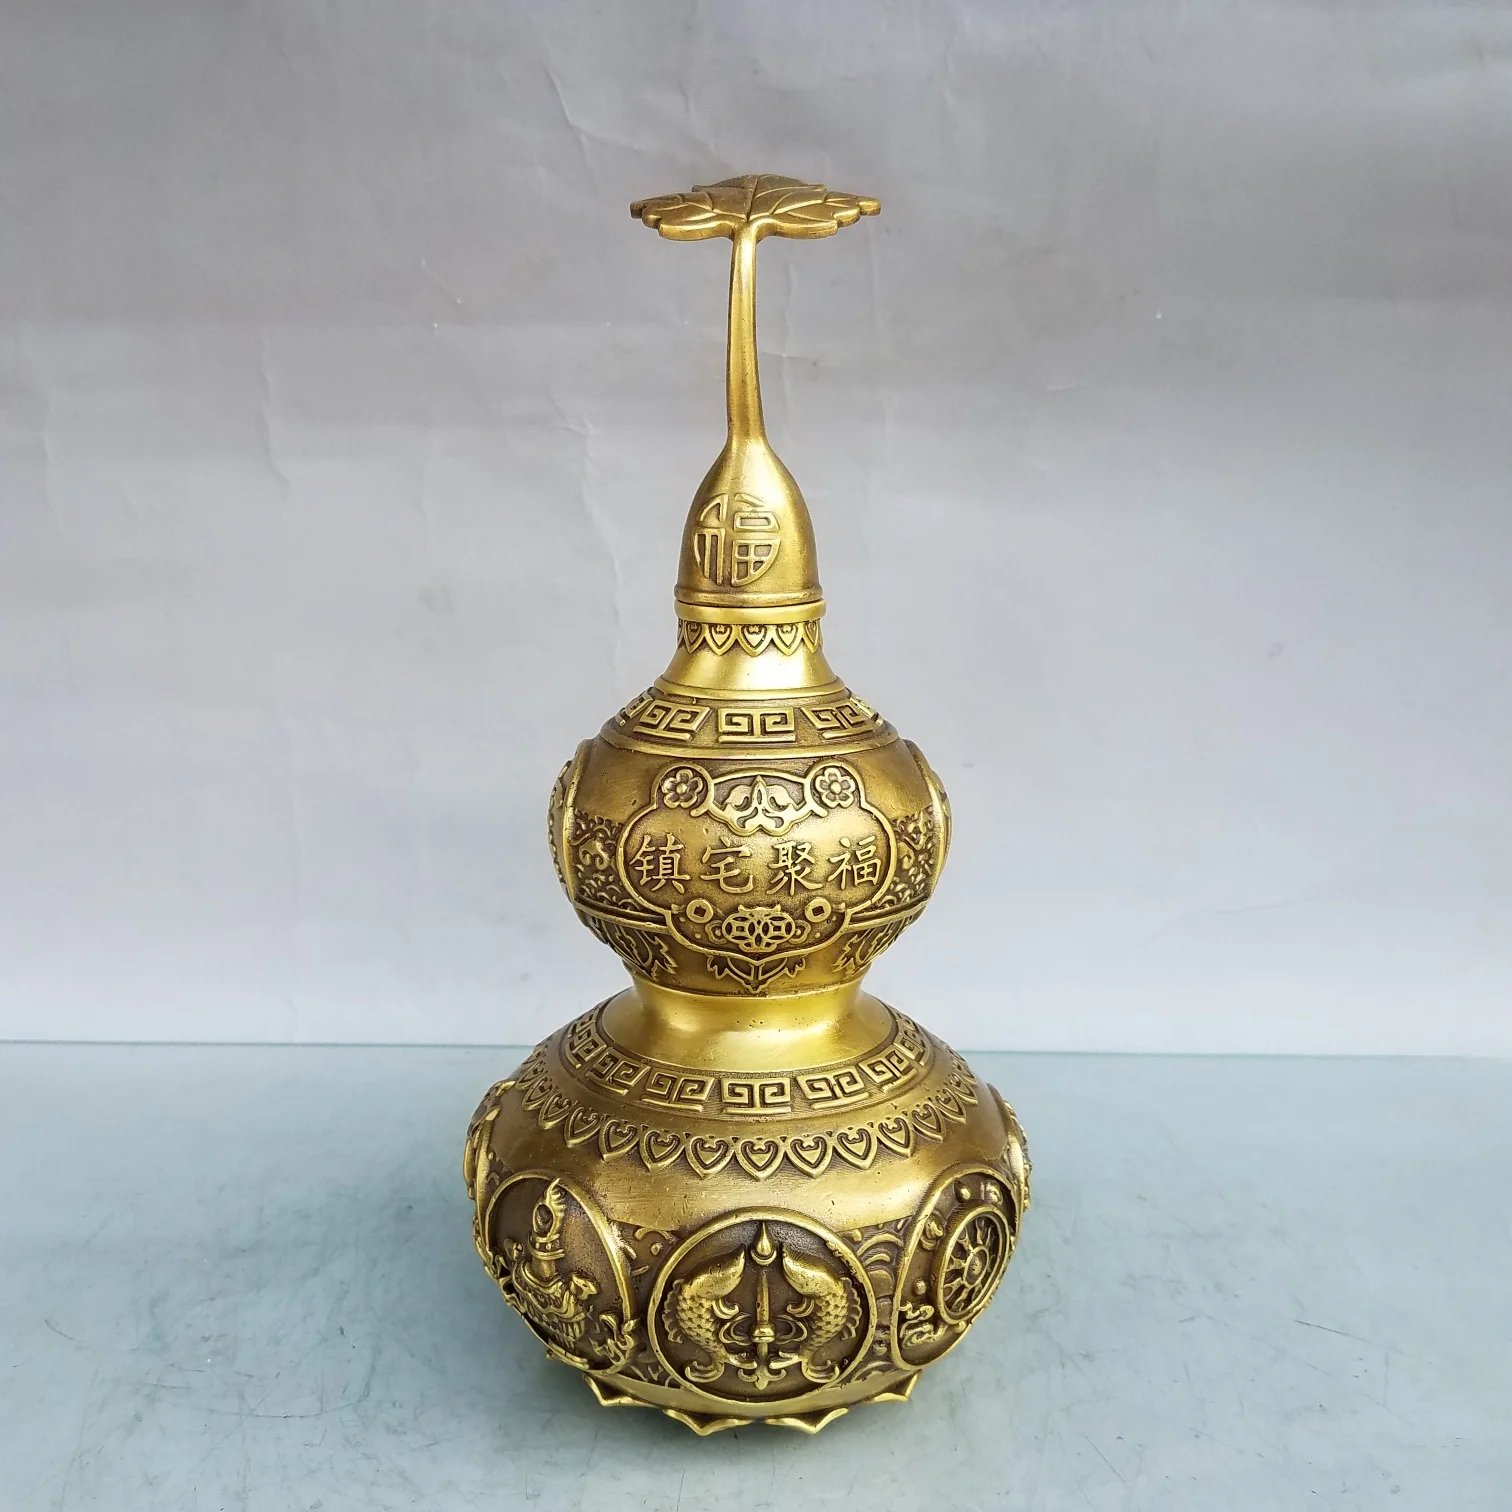 

Home Crafts Suitable For Decoration With Exquisite Workmanship And Beautiful Appearance A Pure Copper Gourd Worth Collecting